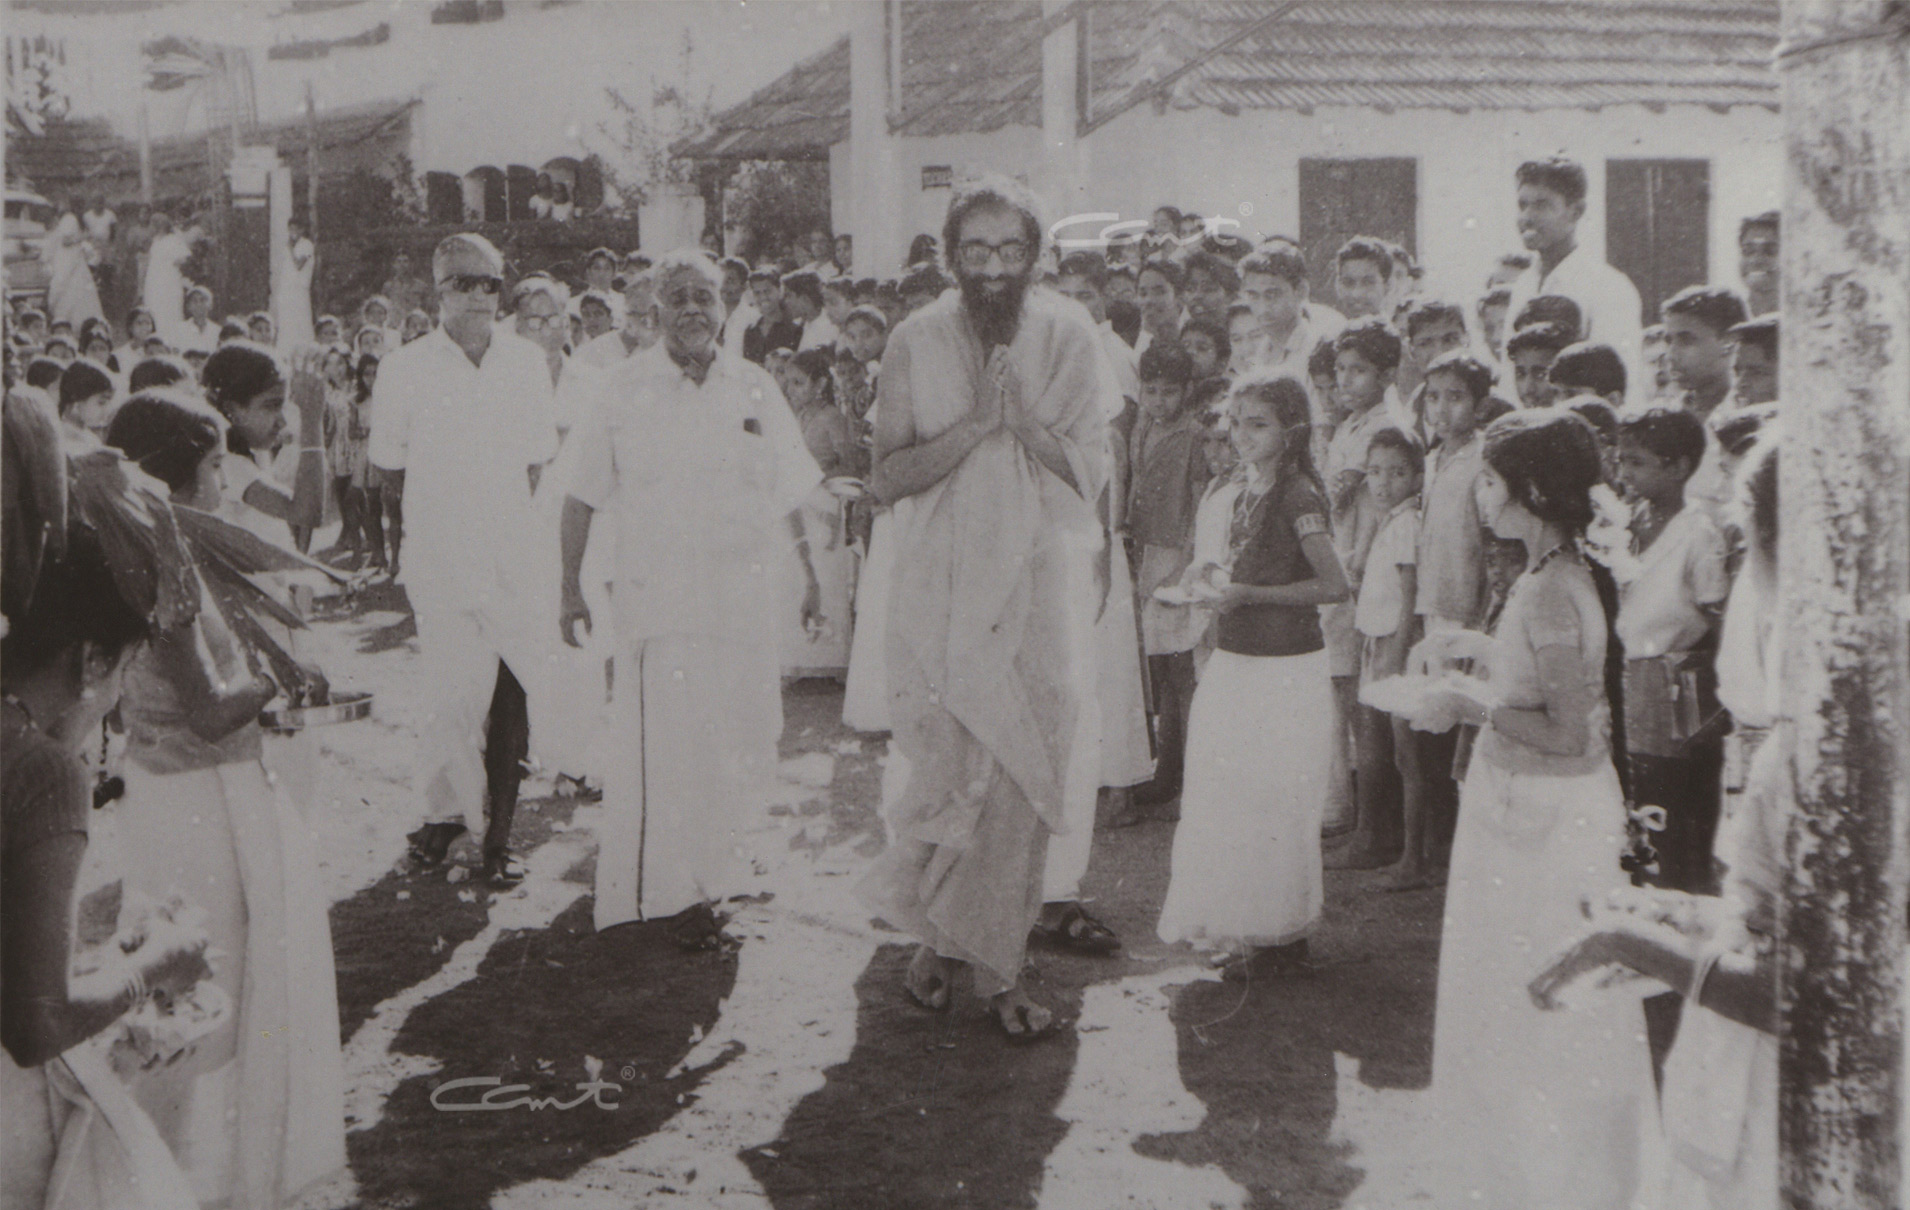 Swami Chinmayananda being welcomed at his alma mater, Vivekodayam Boys High School, Thrissur.